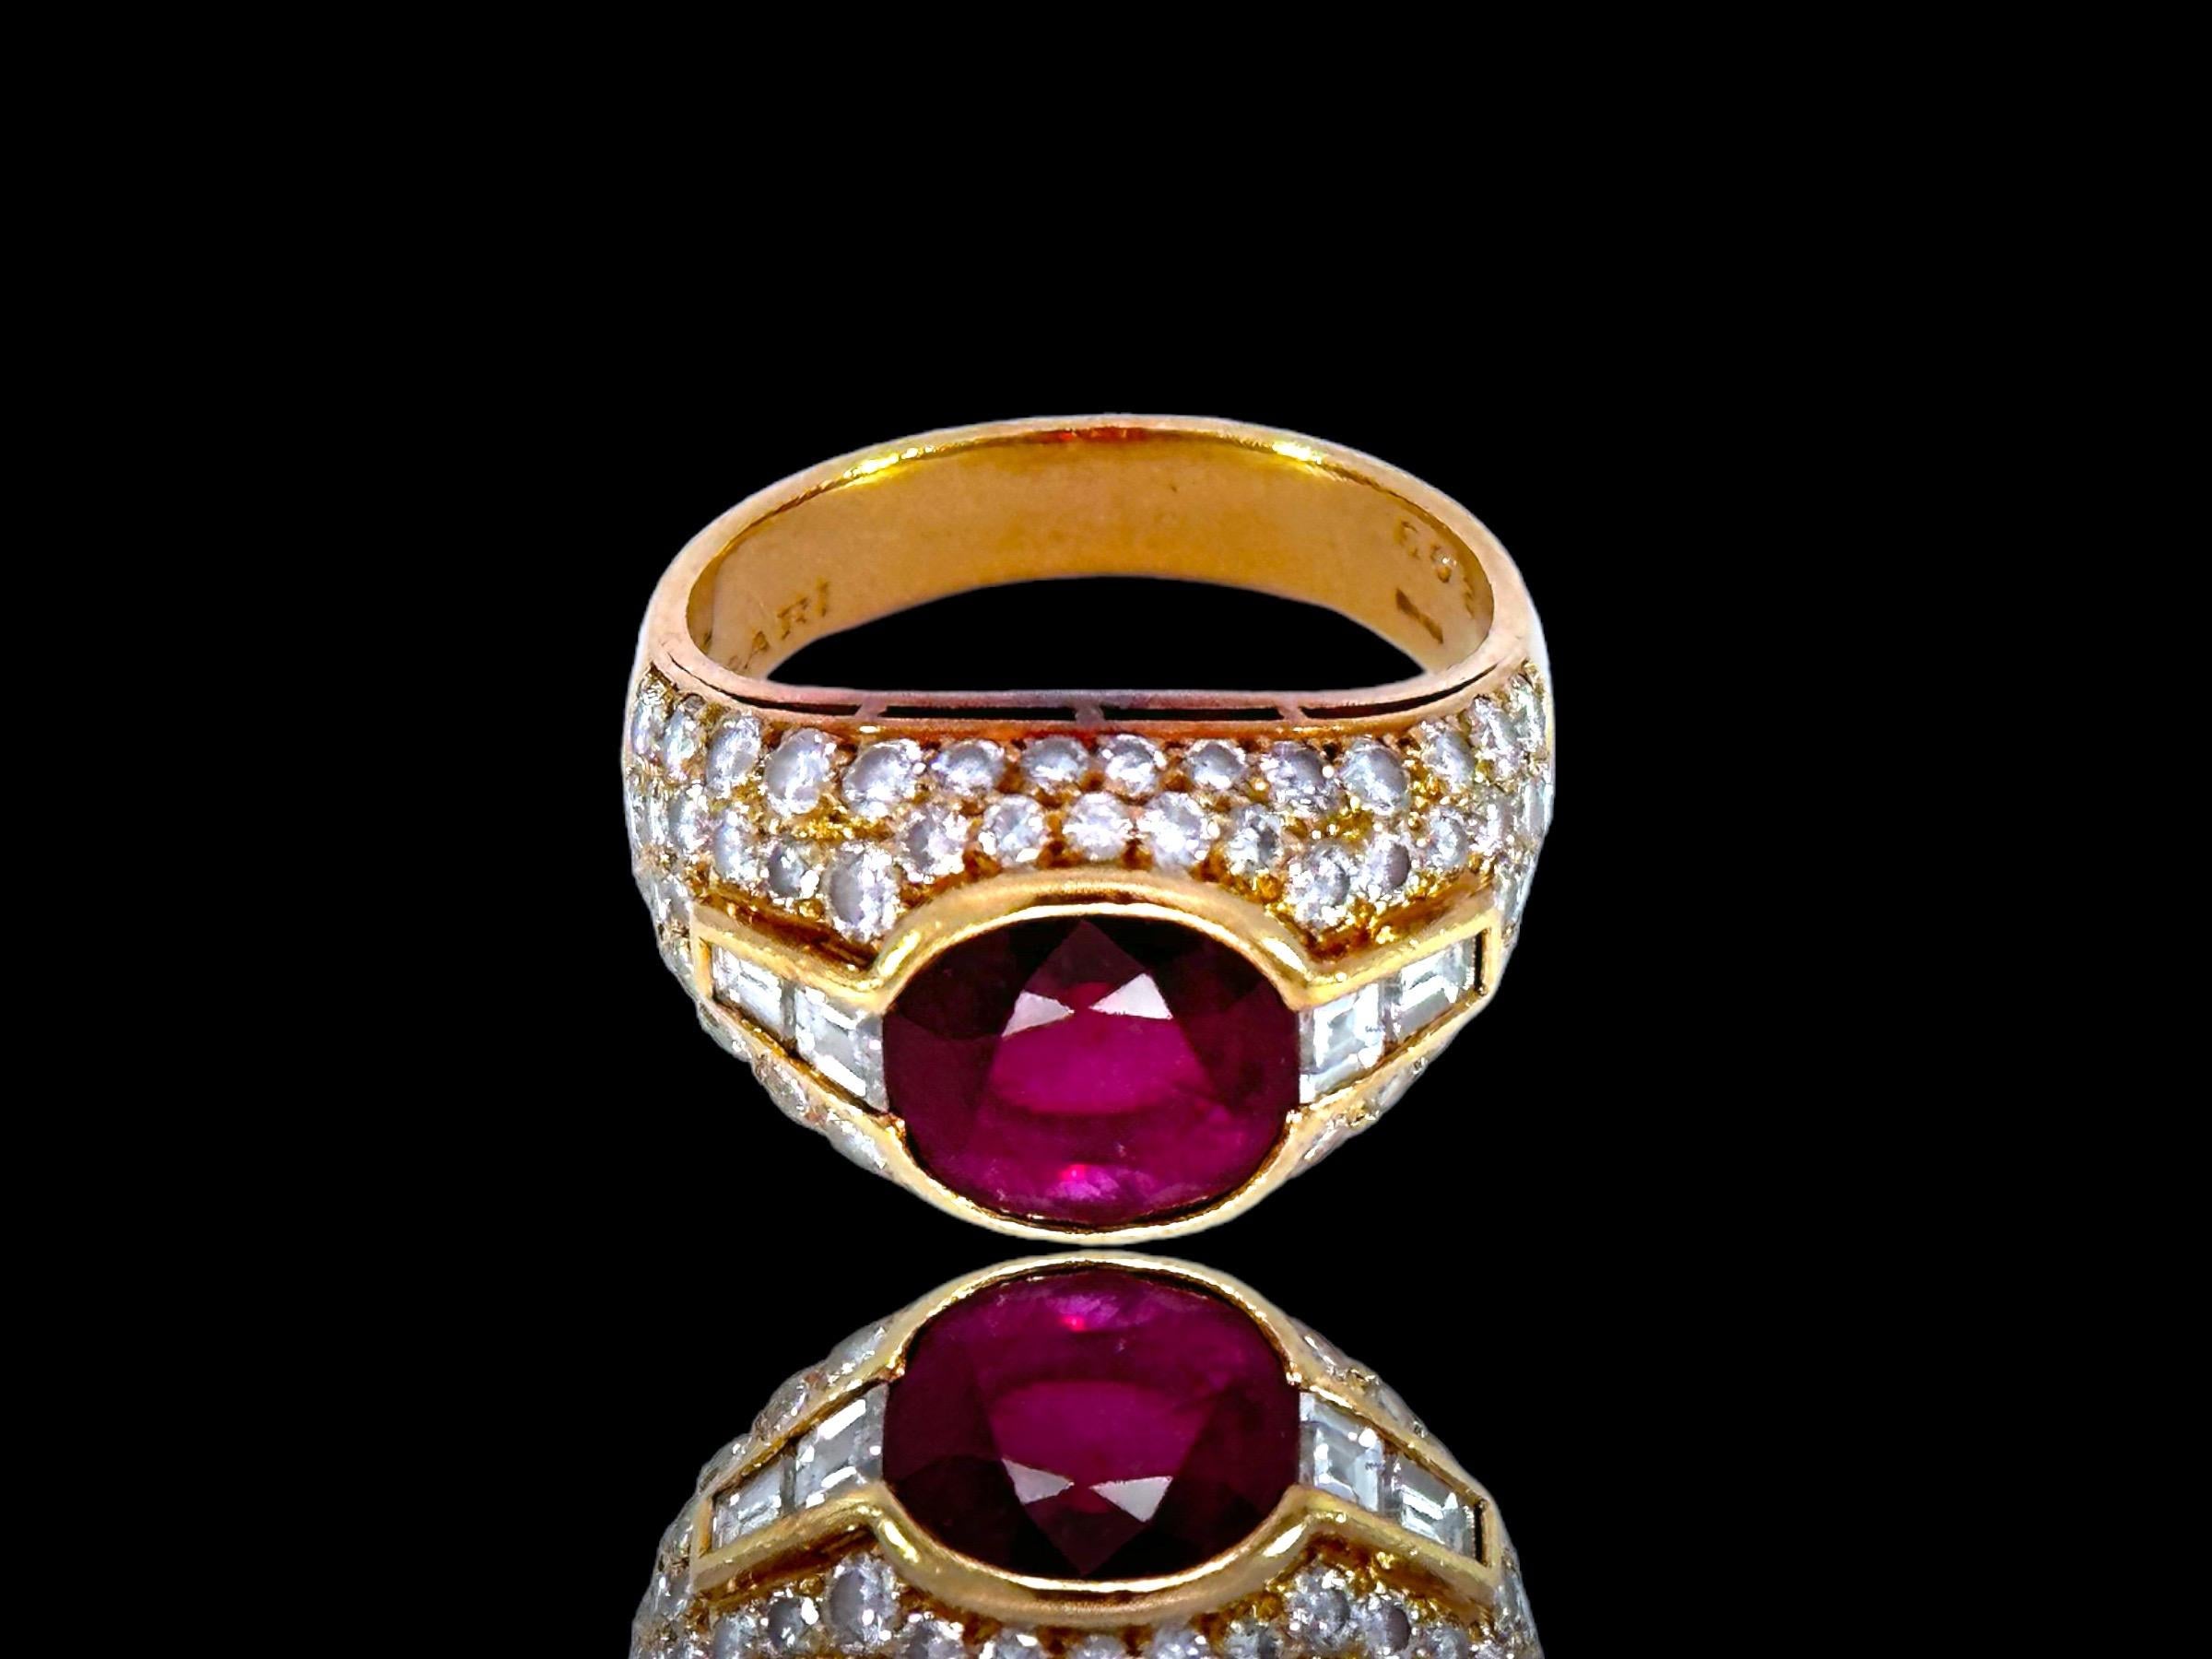 Bvlgari Trombino 18kt Yellow Gold Ring 2.09ct Ruby & Diamonds With GRS Cert In Excellent Condition For Sale In Antwerp, BE